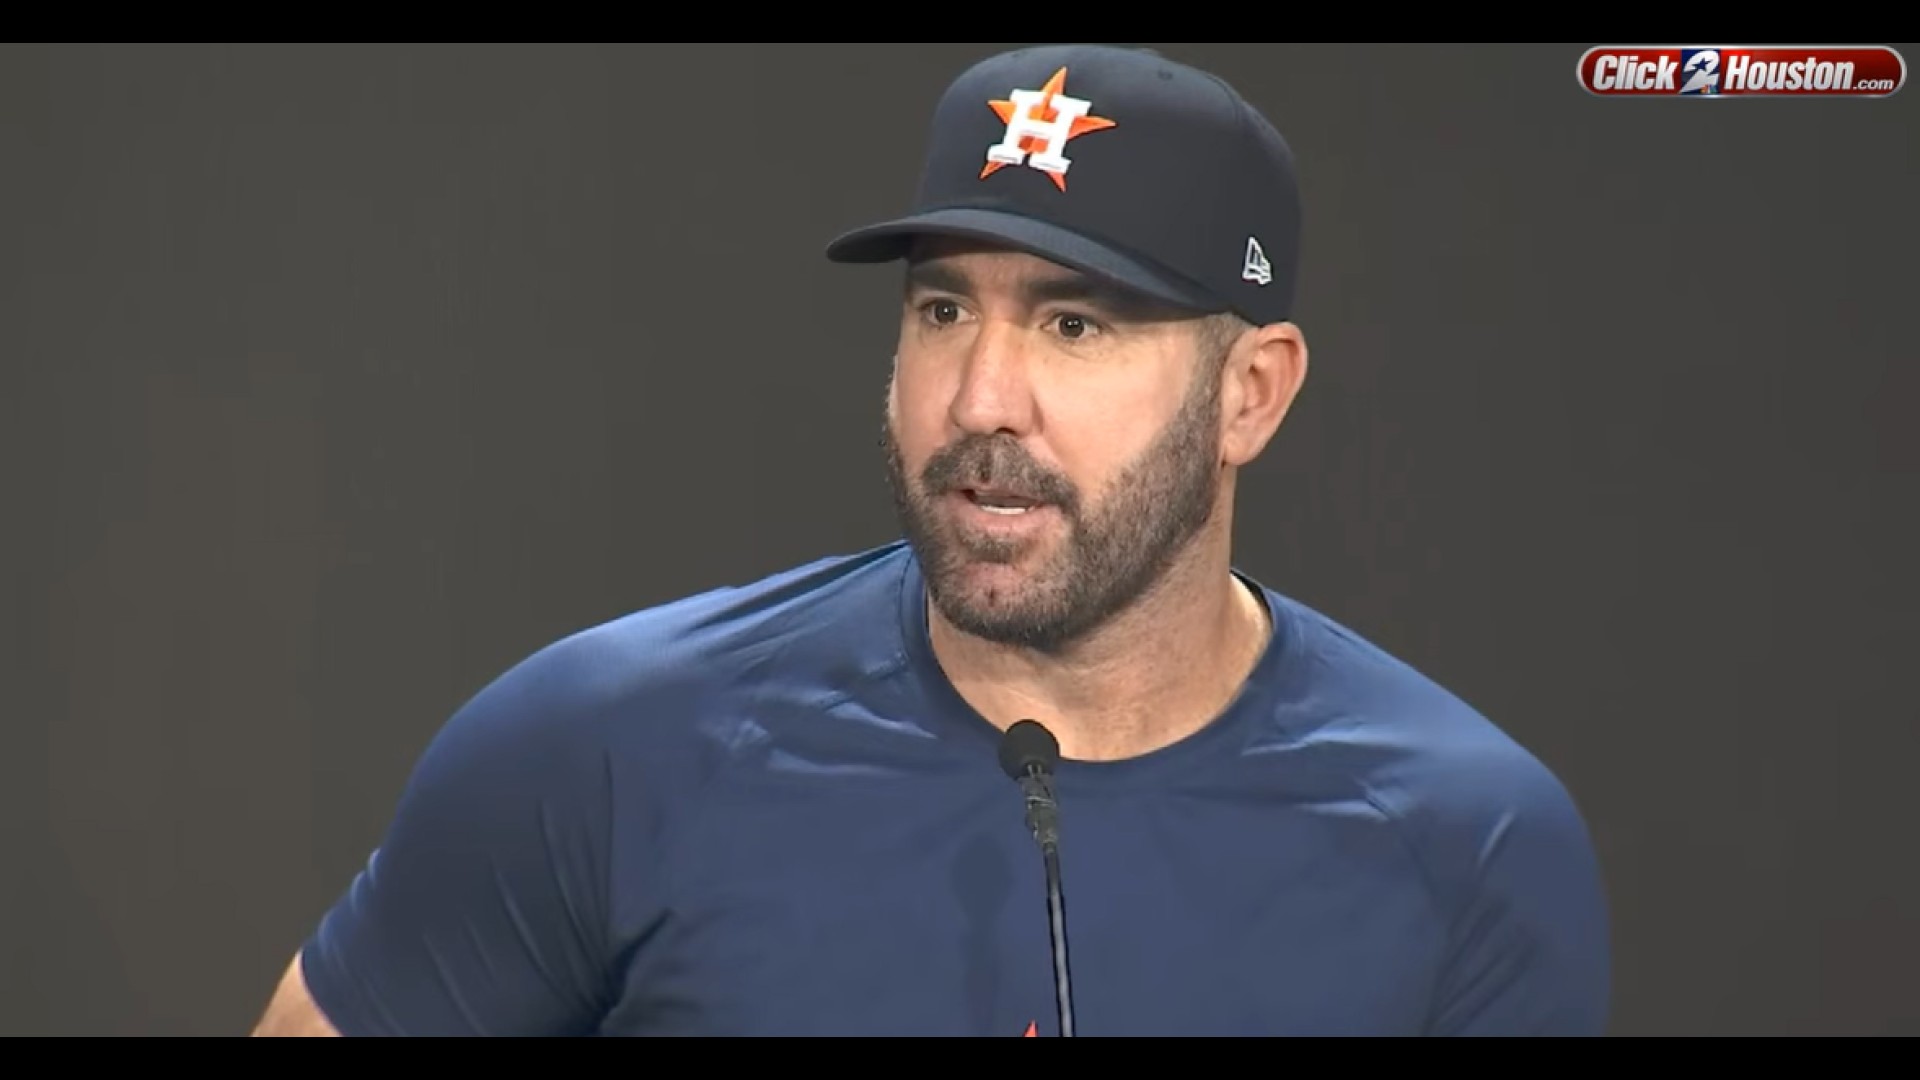 The Mets are trading 3-time Cy Young Award winner Justin Verlander to the  Astros